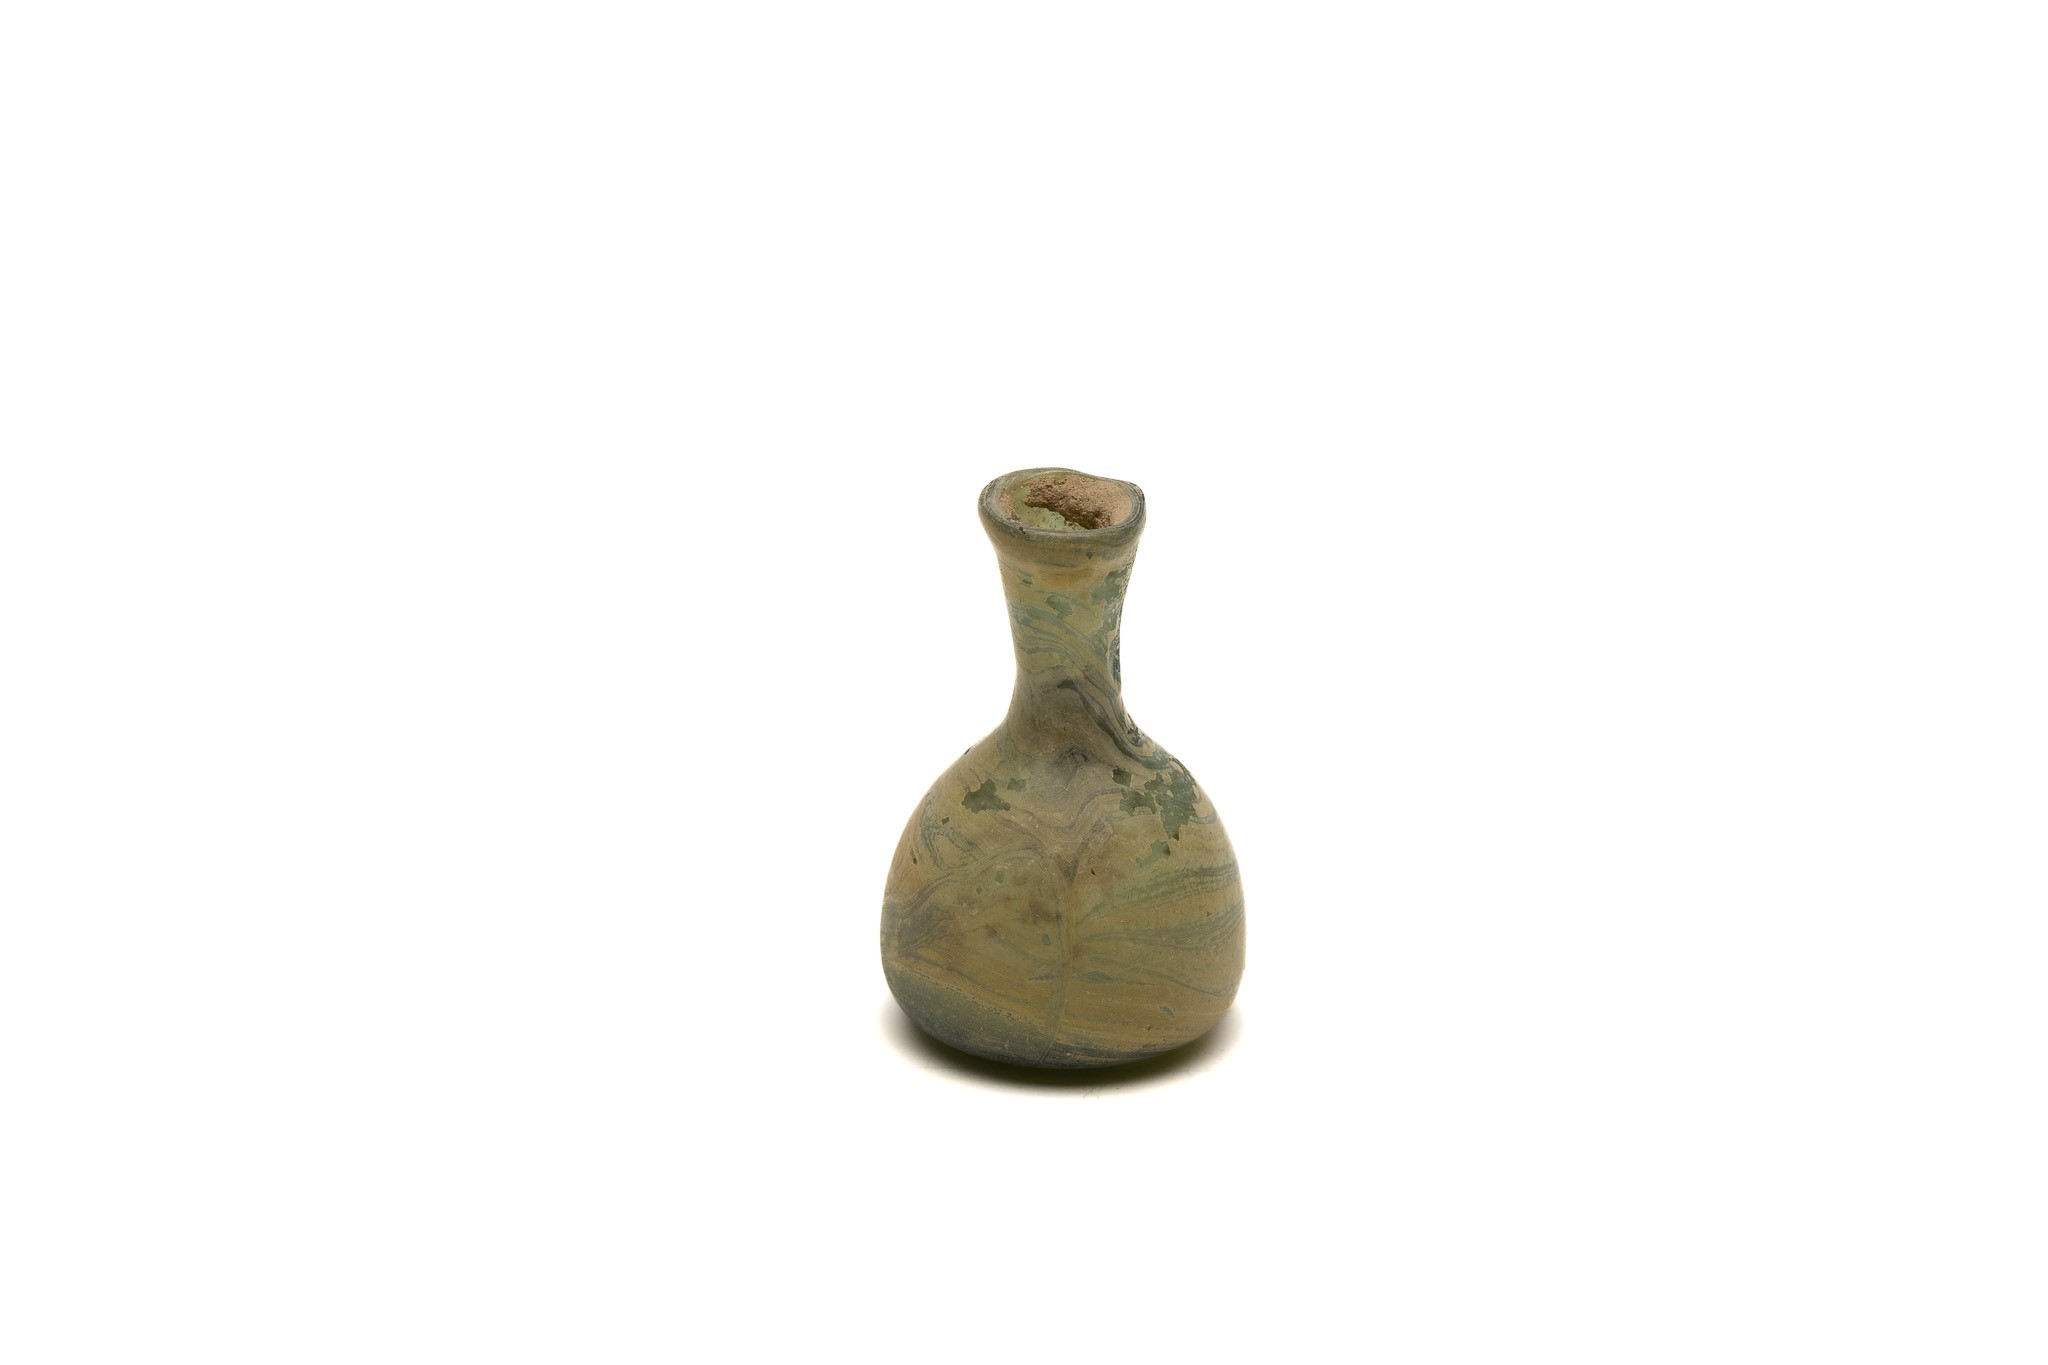 An Islamic Green Glass Small Bottle with Patina from the 11-12th Century.

H: Approximately 5.4cm 